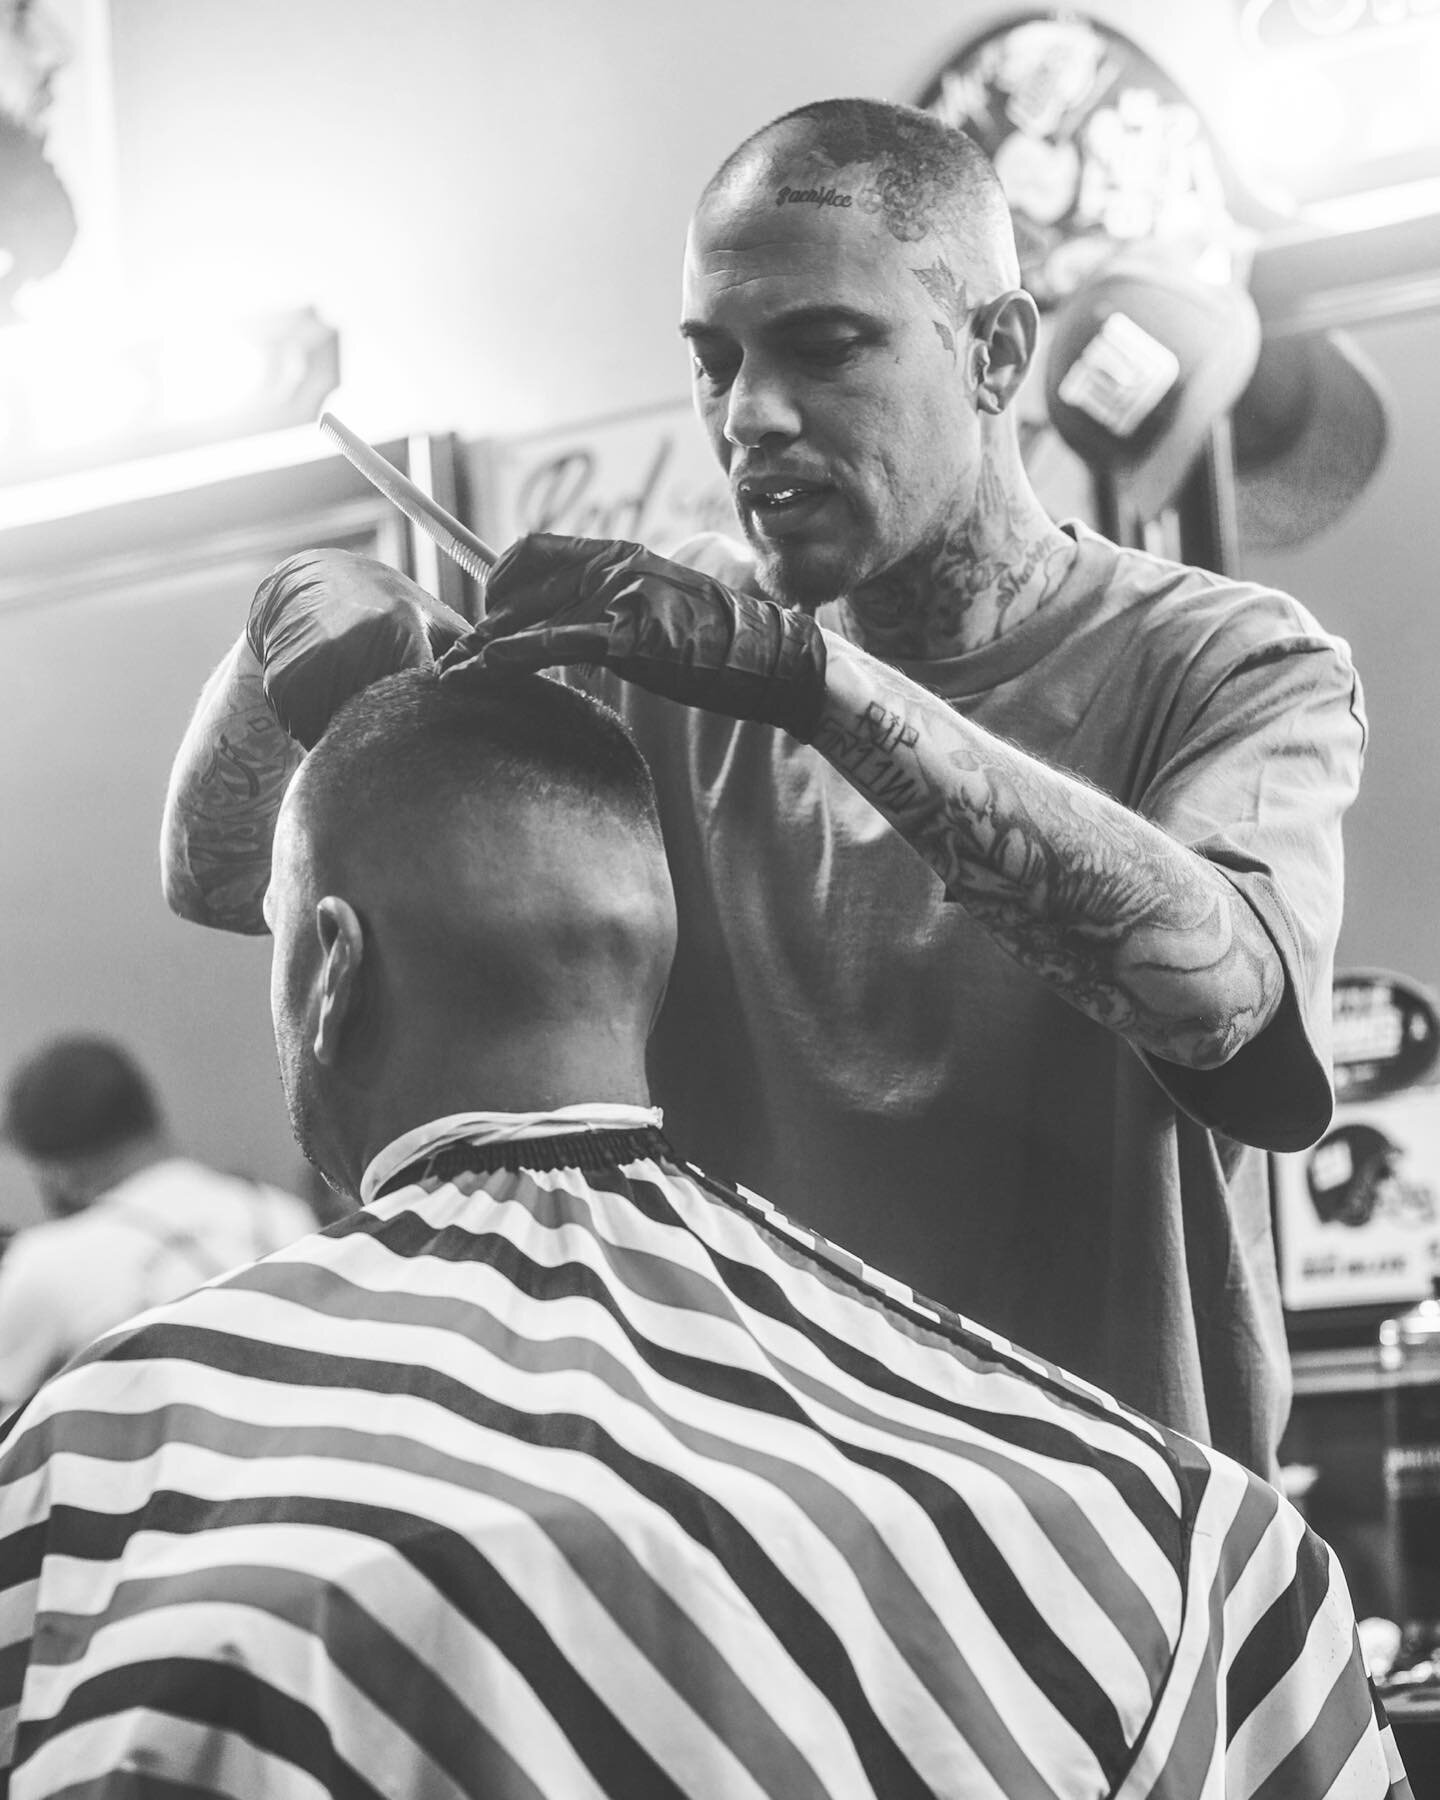 Attention to detail is always provided with every haircut done at the office&hellip; 
REDTHEBARBERSJ.COM
📸 @35mmallie 

#sanjose#losangeles#sanfrancisco#sandiego#newyork#florida#haircuts#fades#tapers#lines#razoredge#power#force#tommy#50cent#starz#st